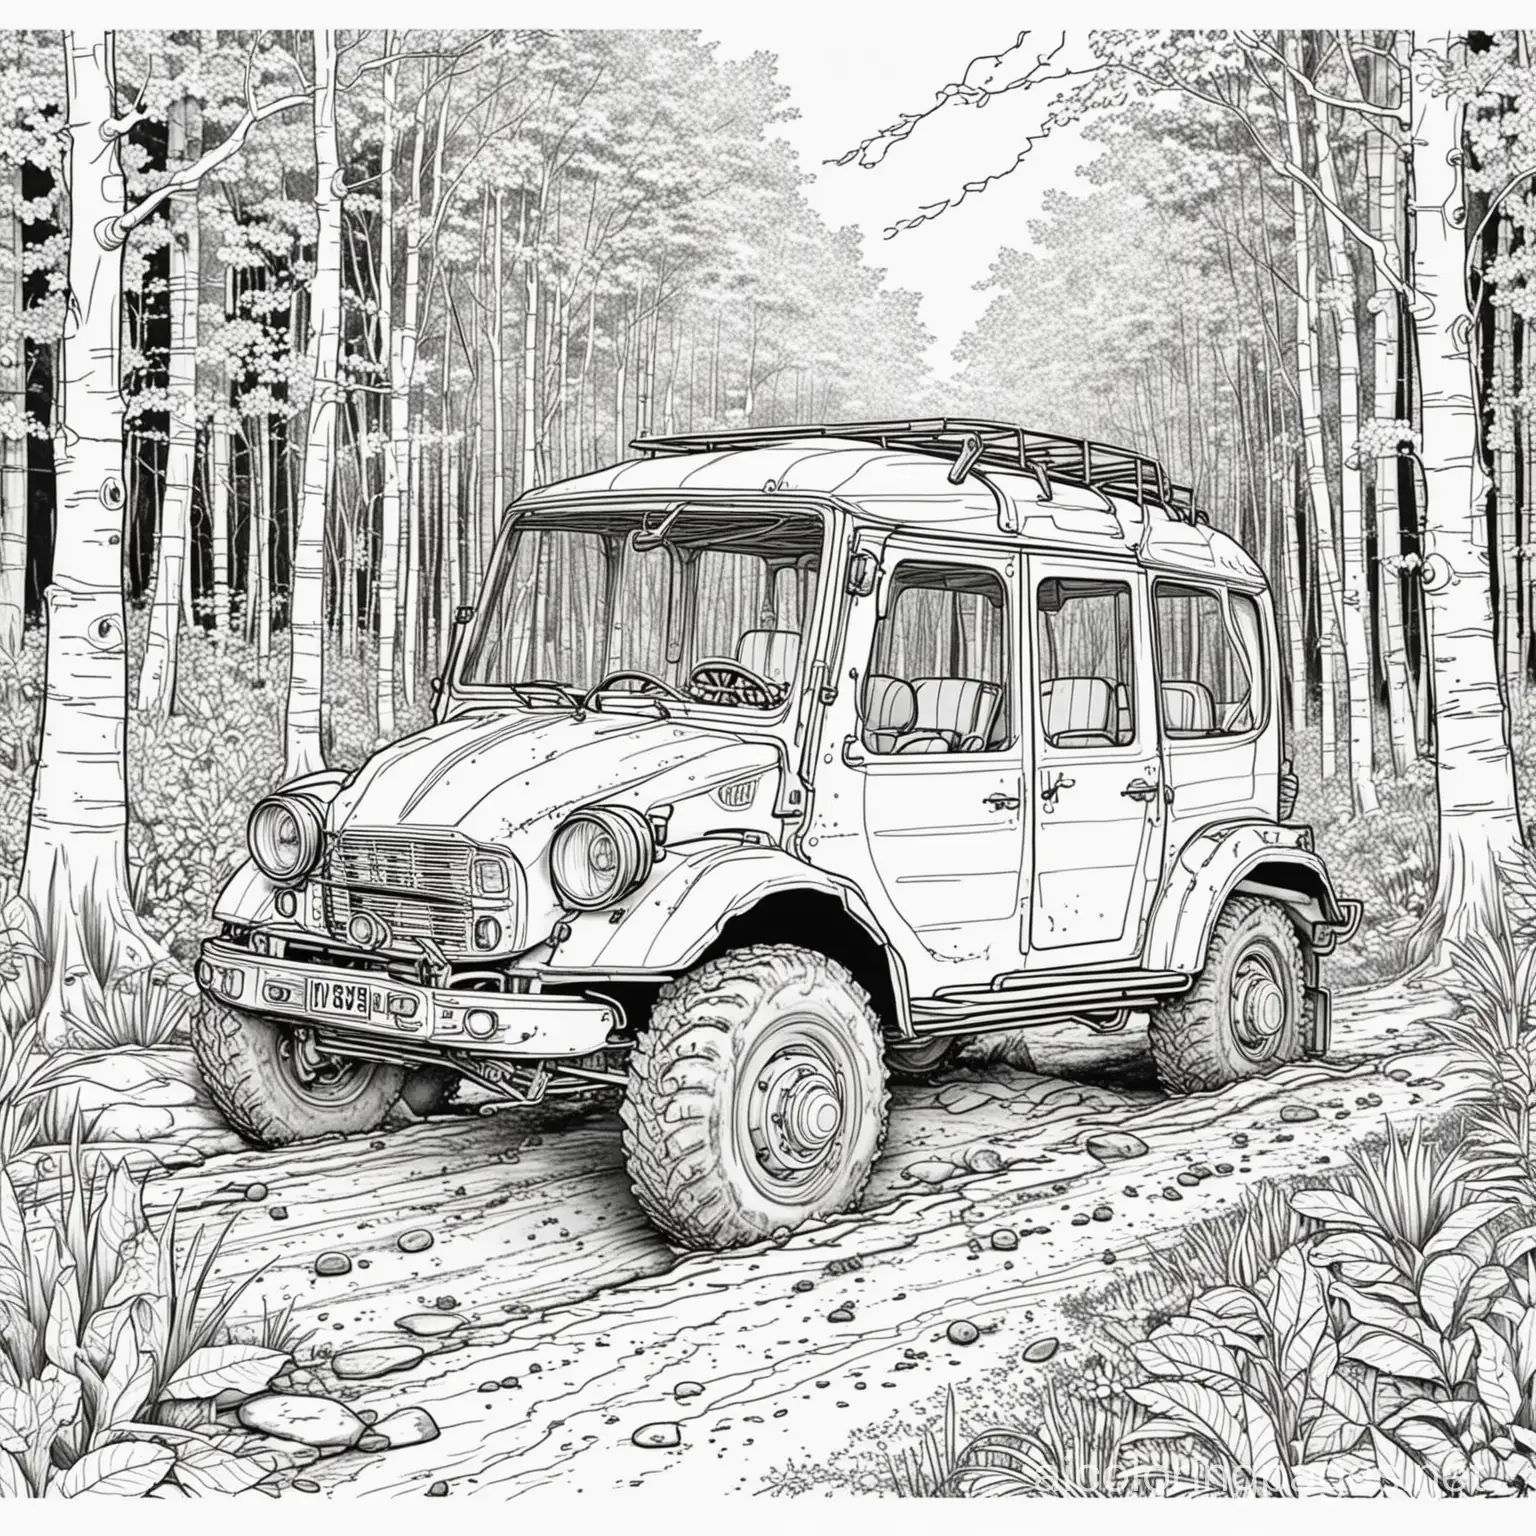 buggy buss in the forest mud, Coloring Page, black and white, line art, white background, Simplicity, Ample White Space. The background of the coloring page is plain white to make it easy for young children to color within the lines. The outlines of all the subjects are easy to distinguish, making it simple for kids to color without too much difficulty